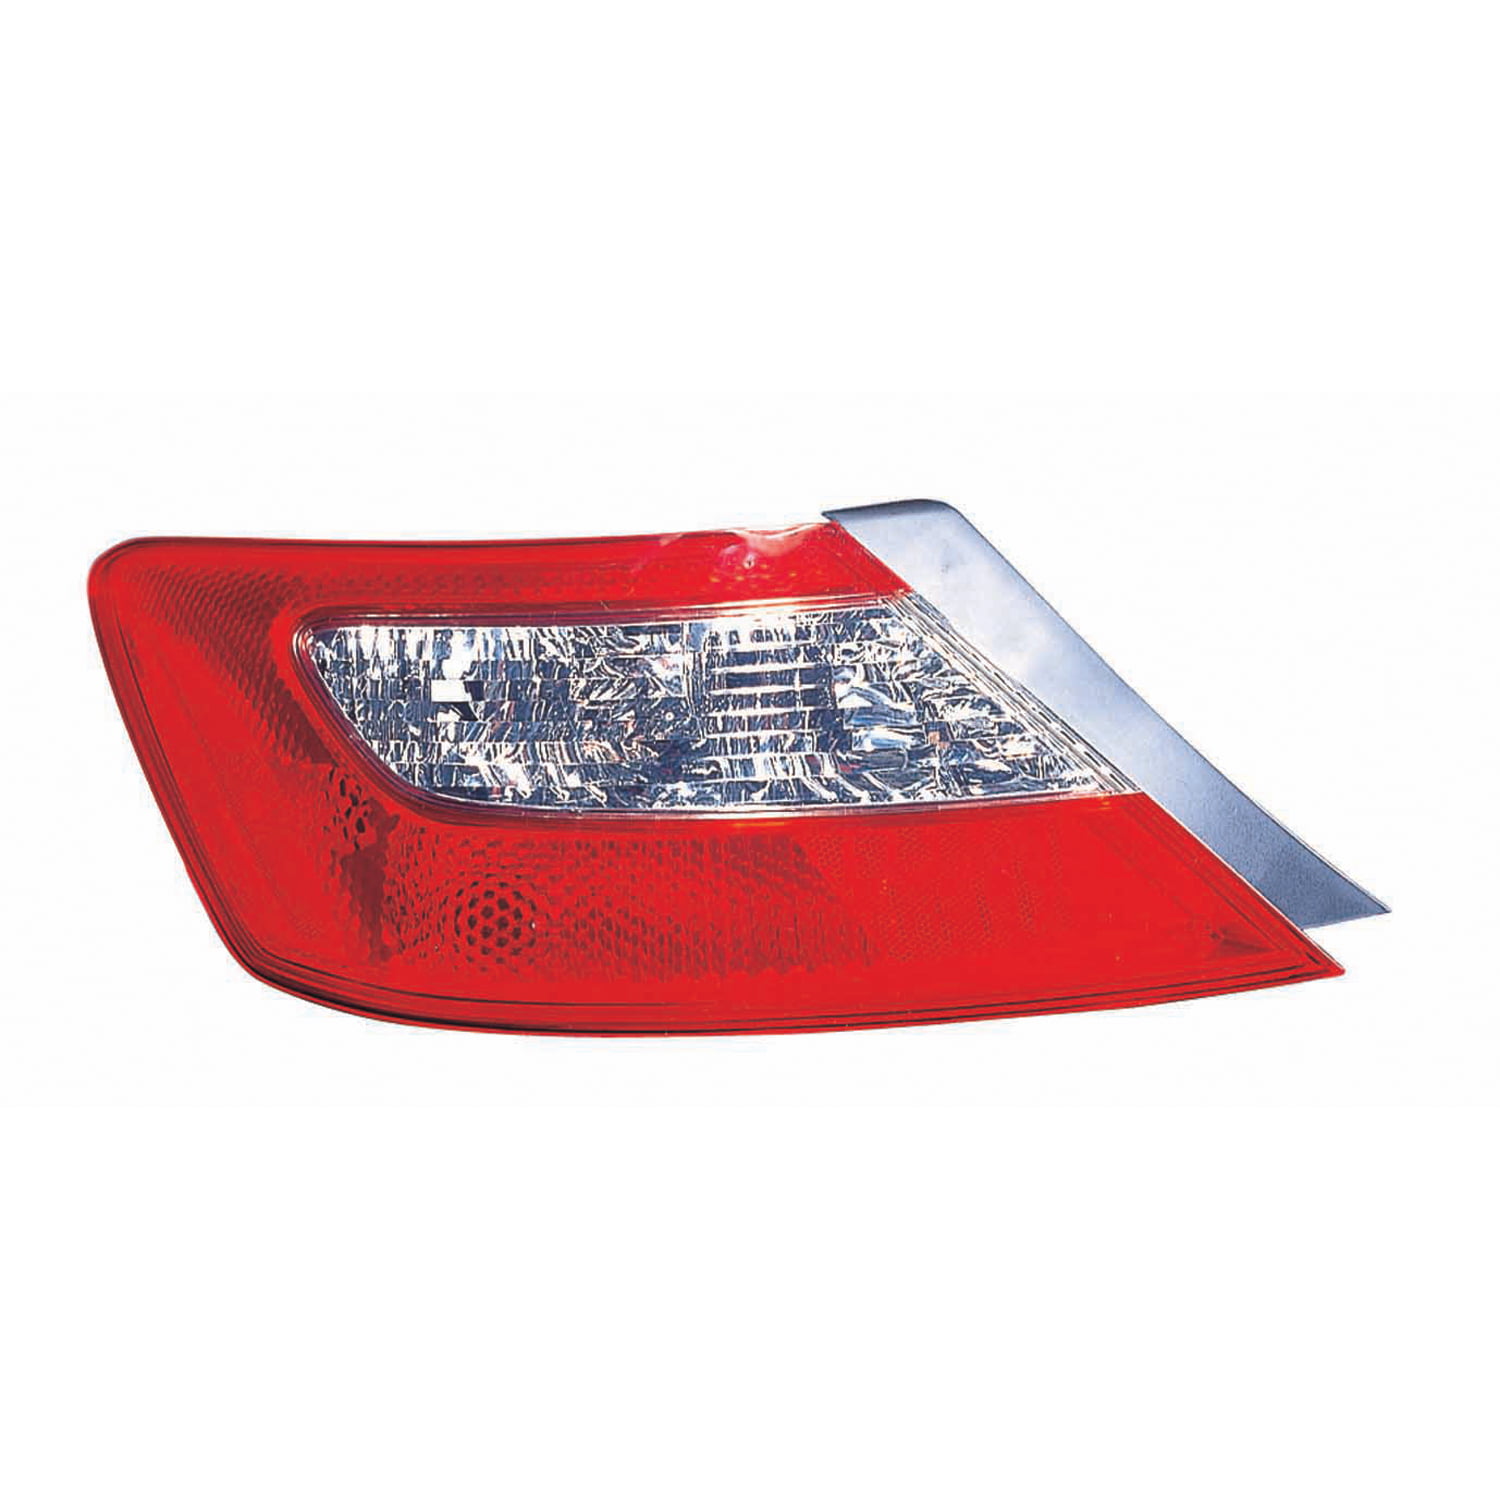 Aftermarket 2009-2011 Honda Civic DX Coupe 2-Door Aftermarket Driver Side Rear Tail Lamp Lens 2009 Honda Civic Tail Light Cover Replacement